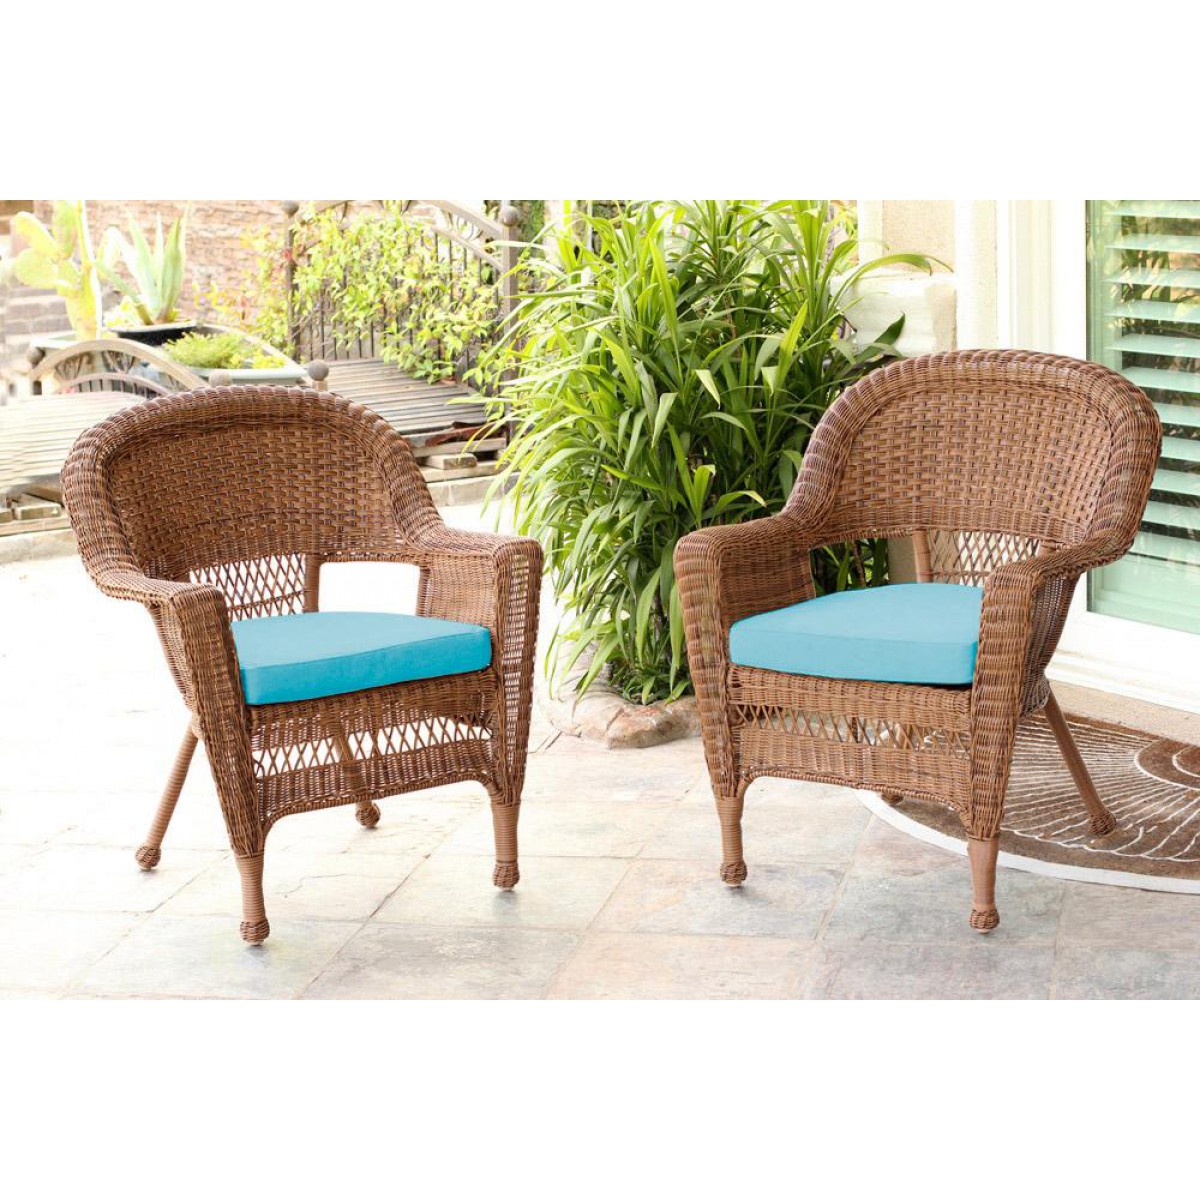 Honey Wicker Chair With Sky Blue Cushion - Set of 2